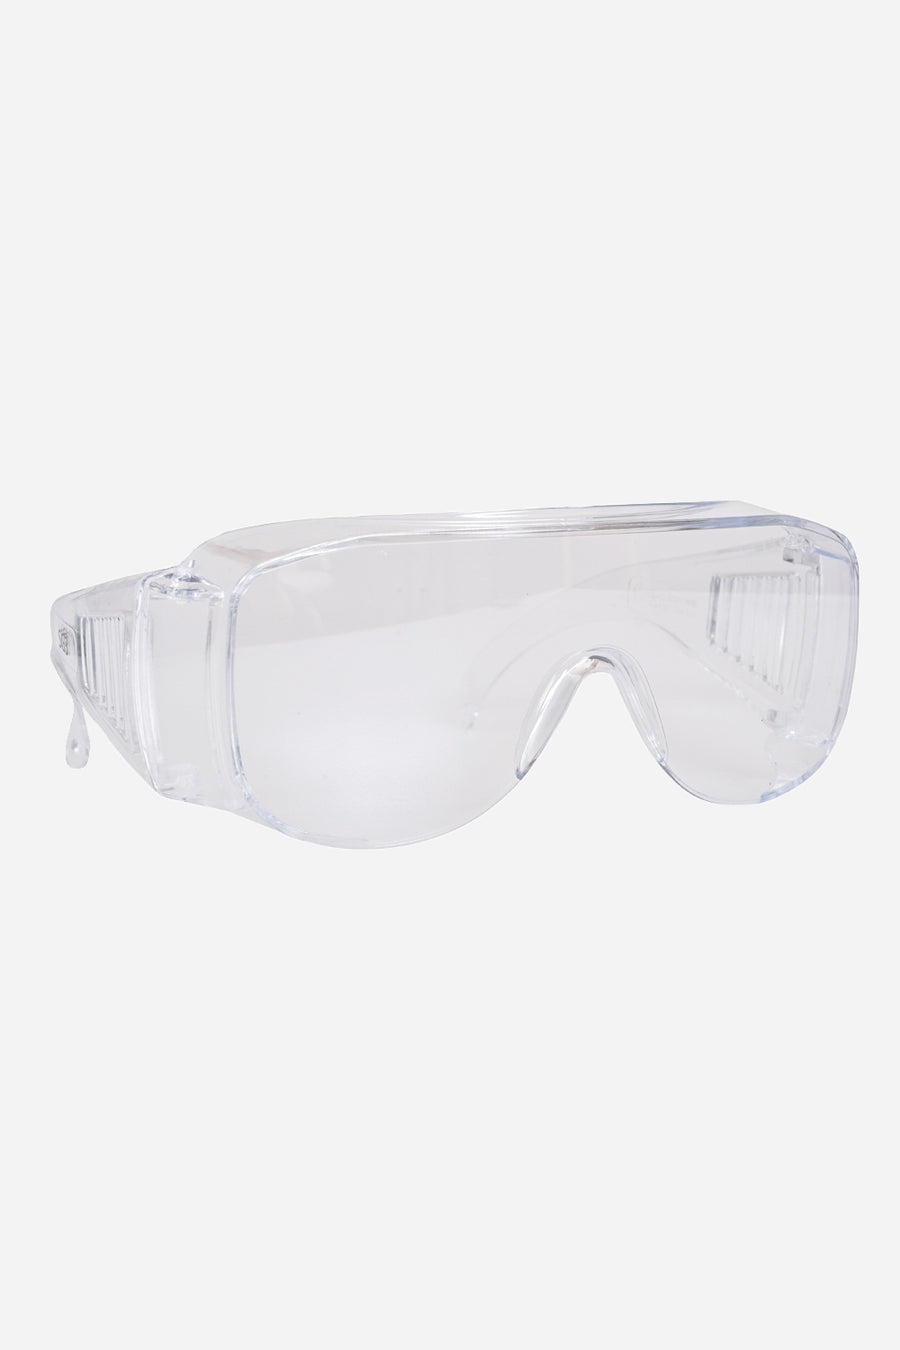 Over Wrap Safety Glasses